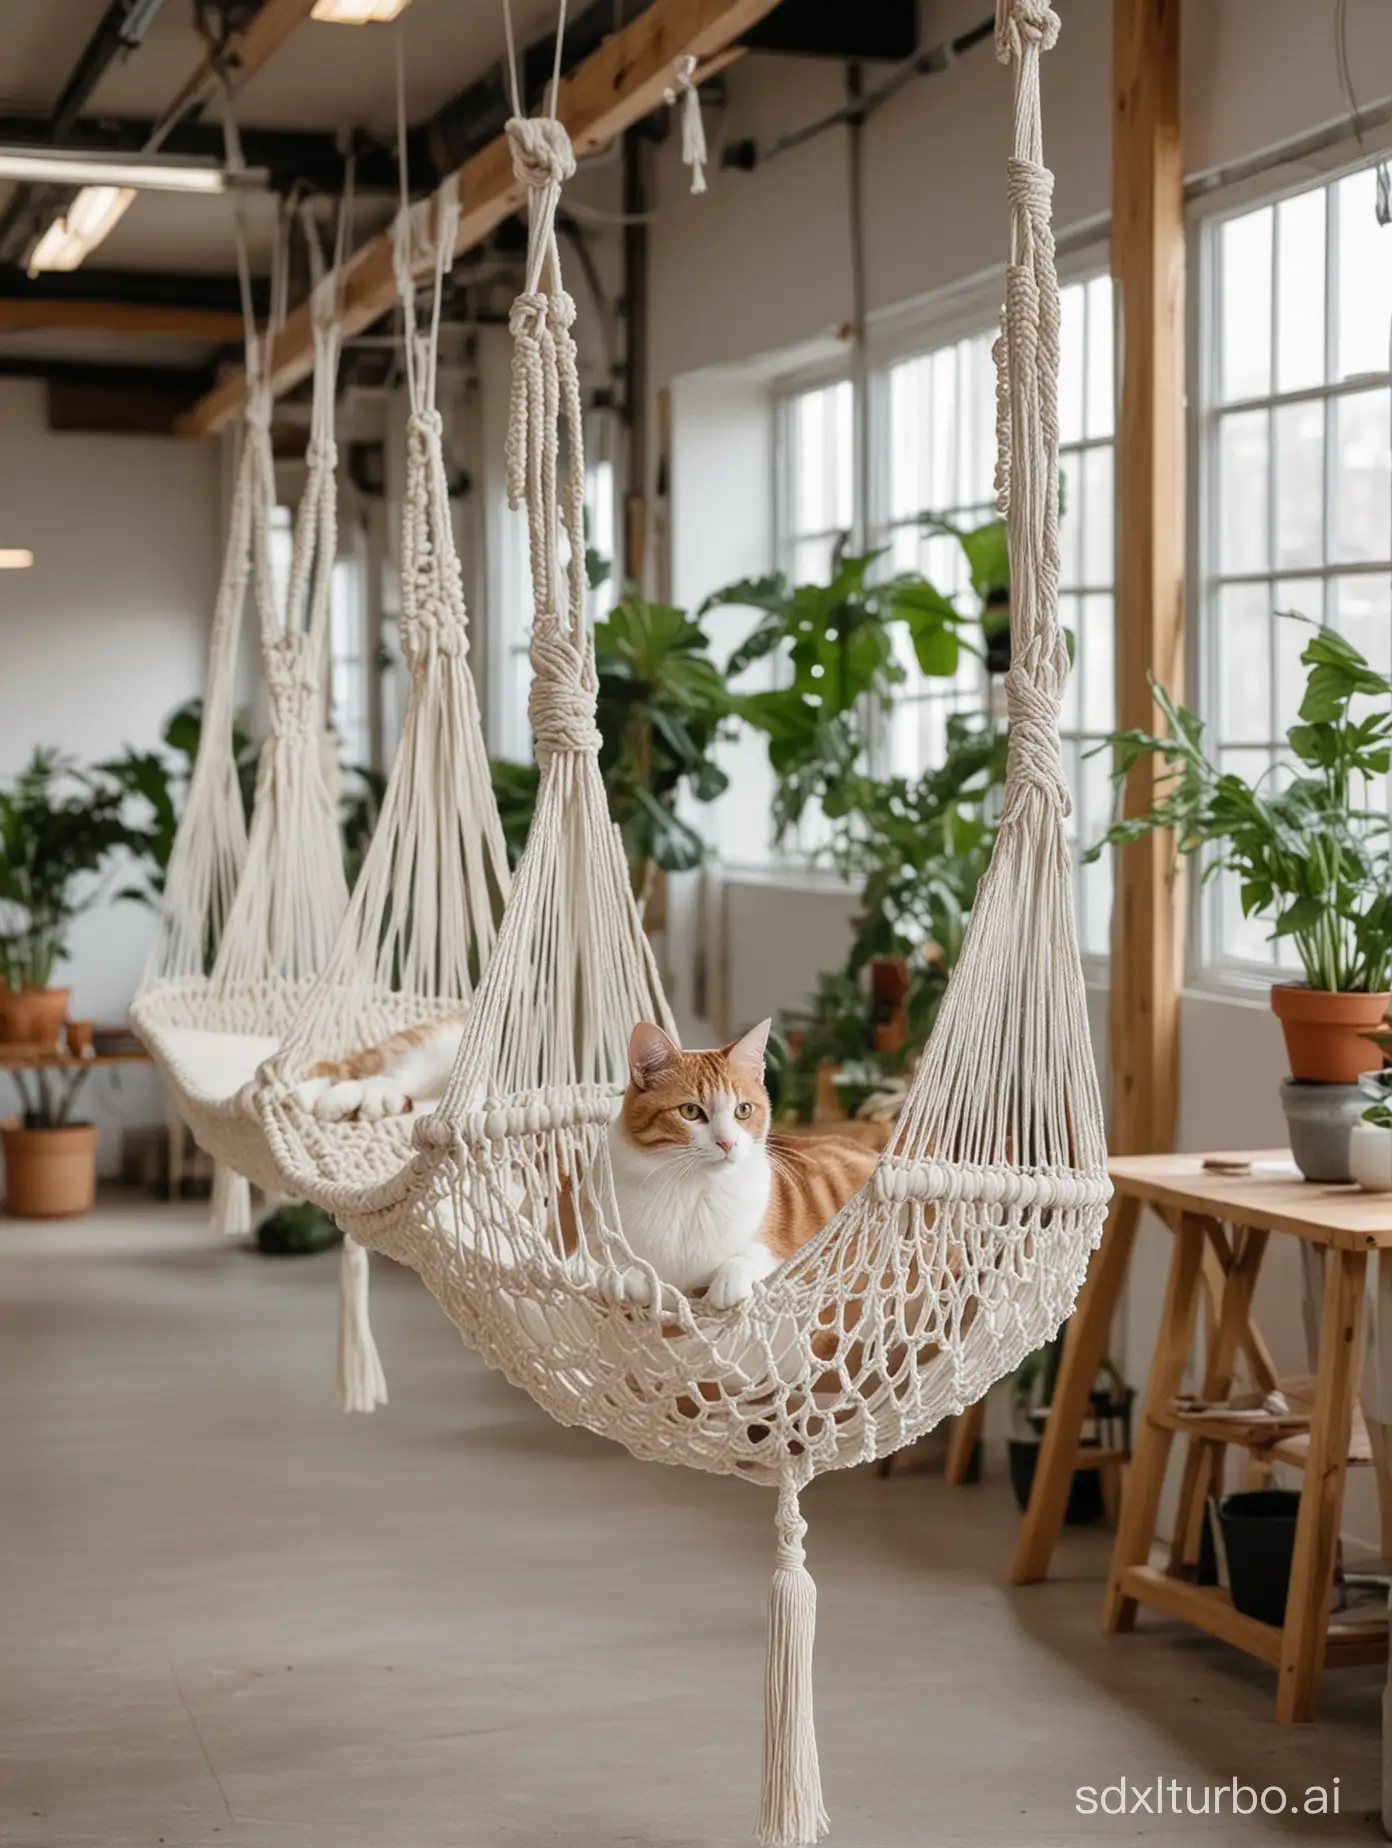 A factory that manufactures macrame cat hammocks, advocating for environmentalism, warmth, art, and aesthetics in cotton rope weaving